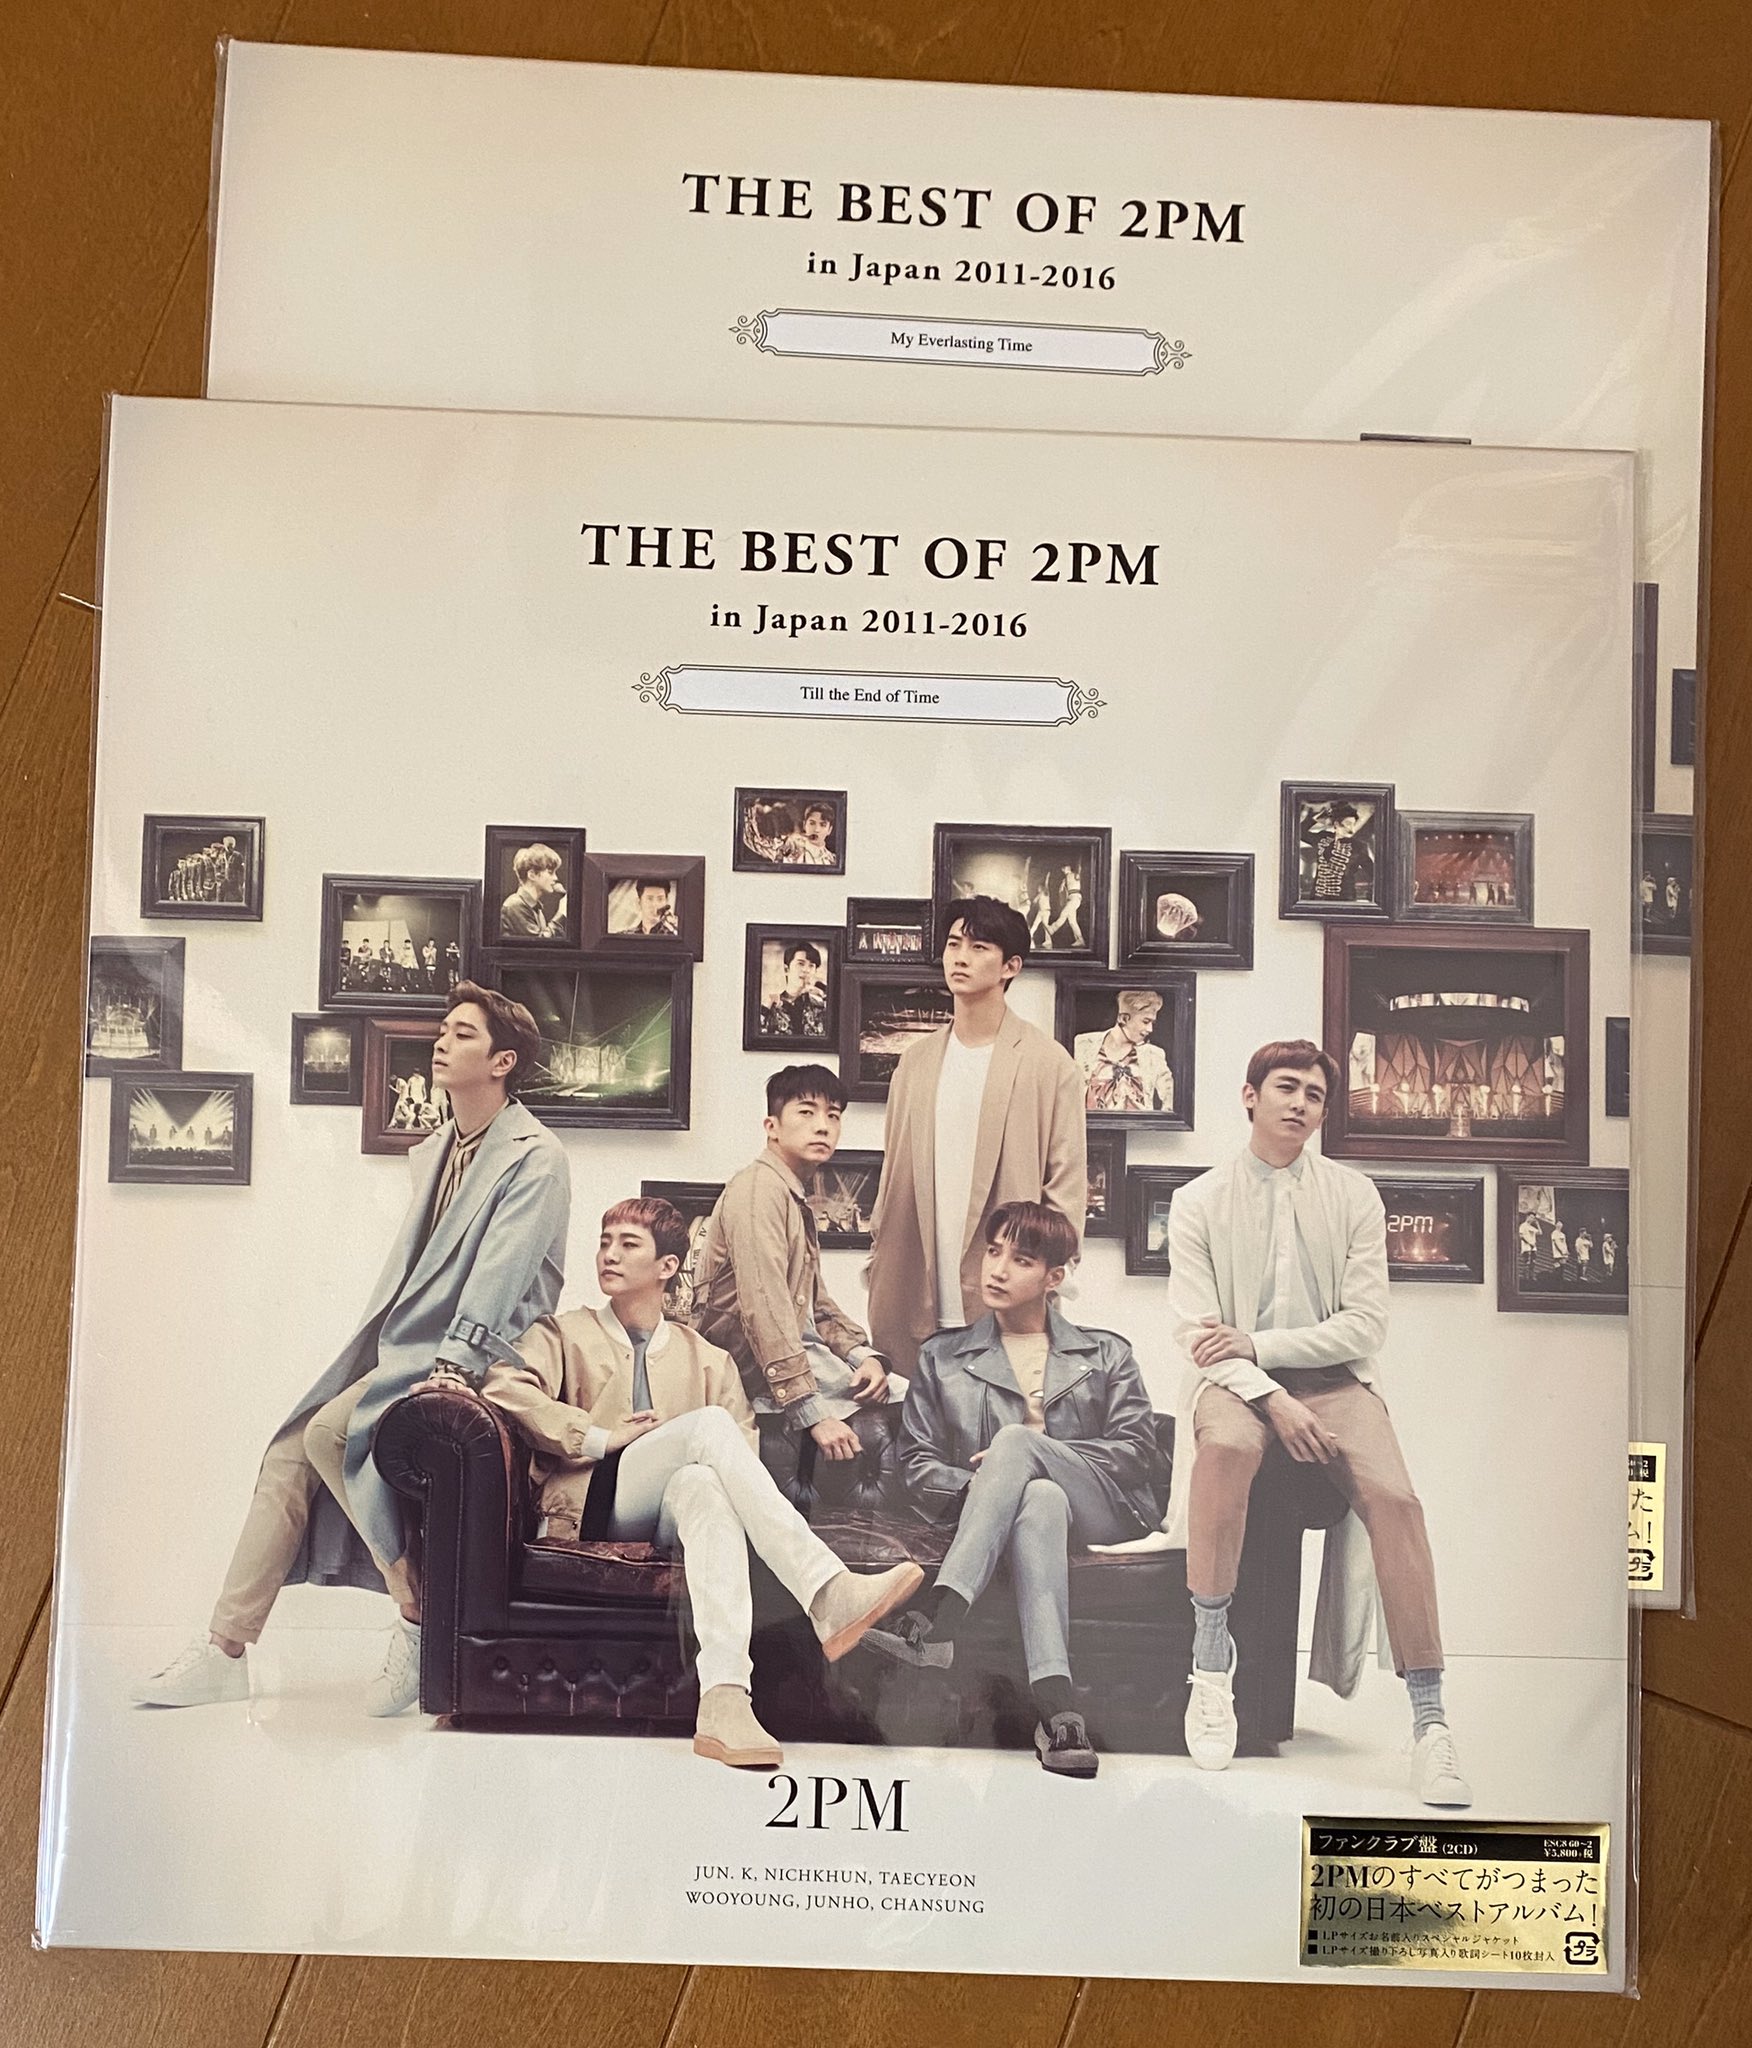 THE BEST OF 2PM in Japan 2011-2016 LP-